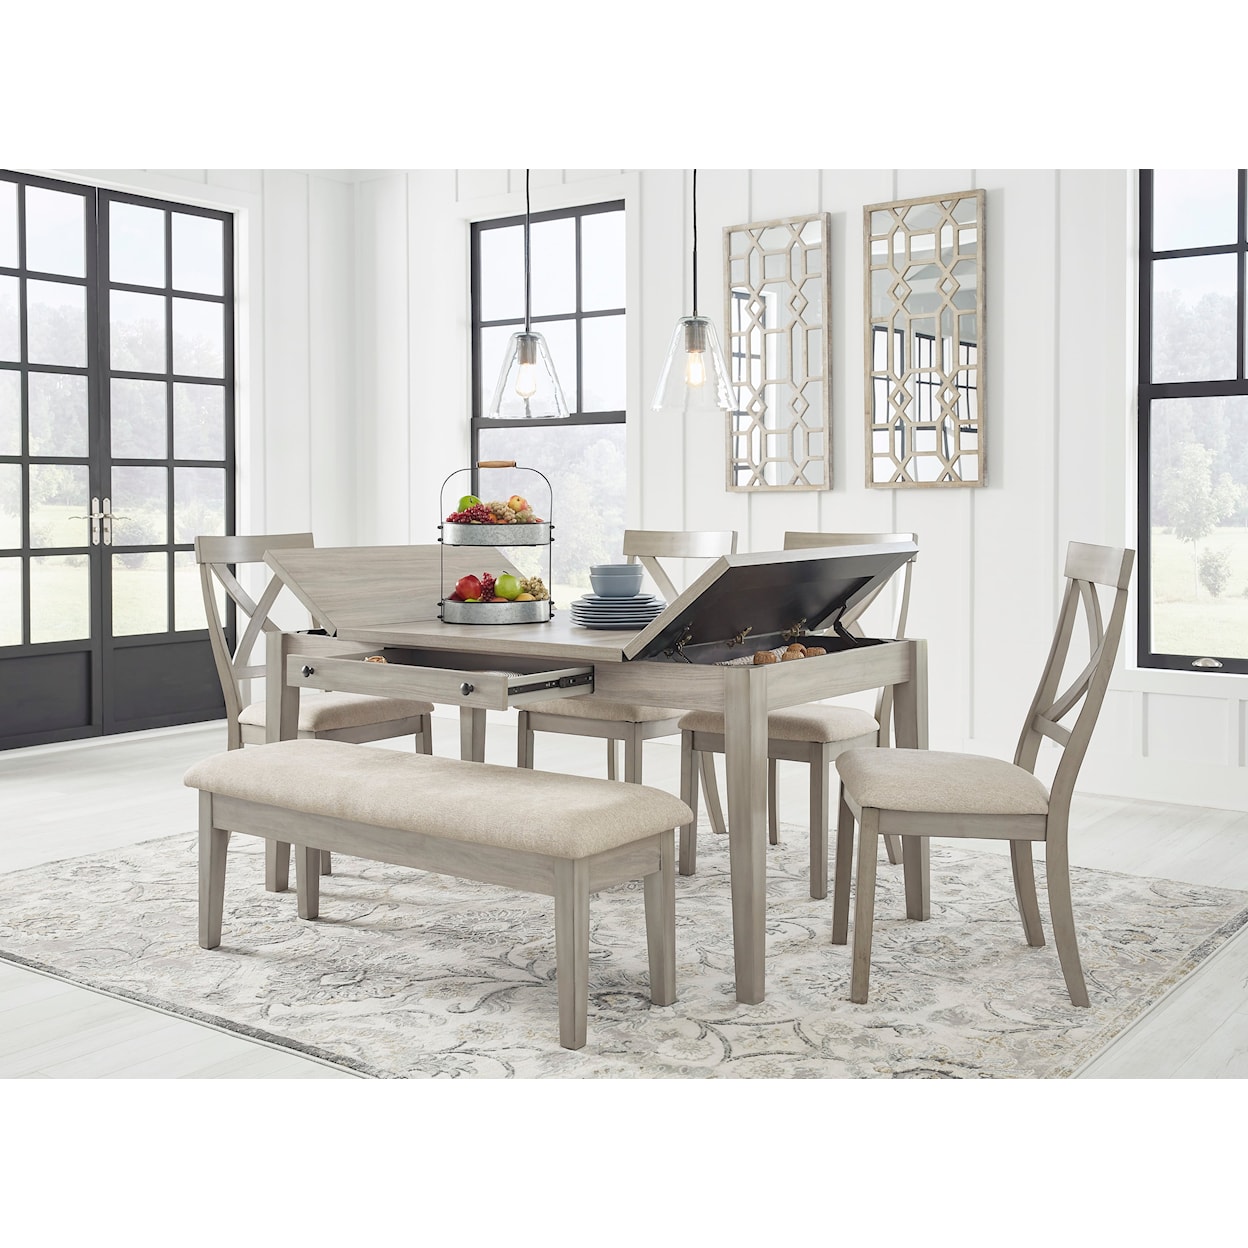 Signature Design by Ashley Furniture Parellen 6-Piece Table and Chair Set with Bench